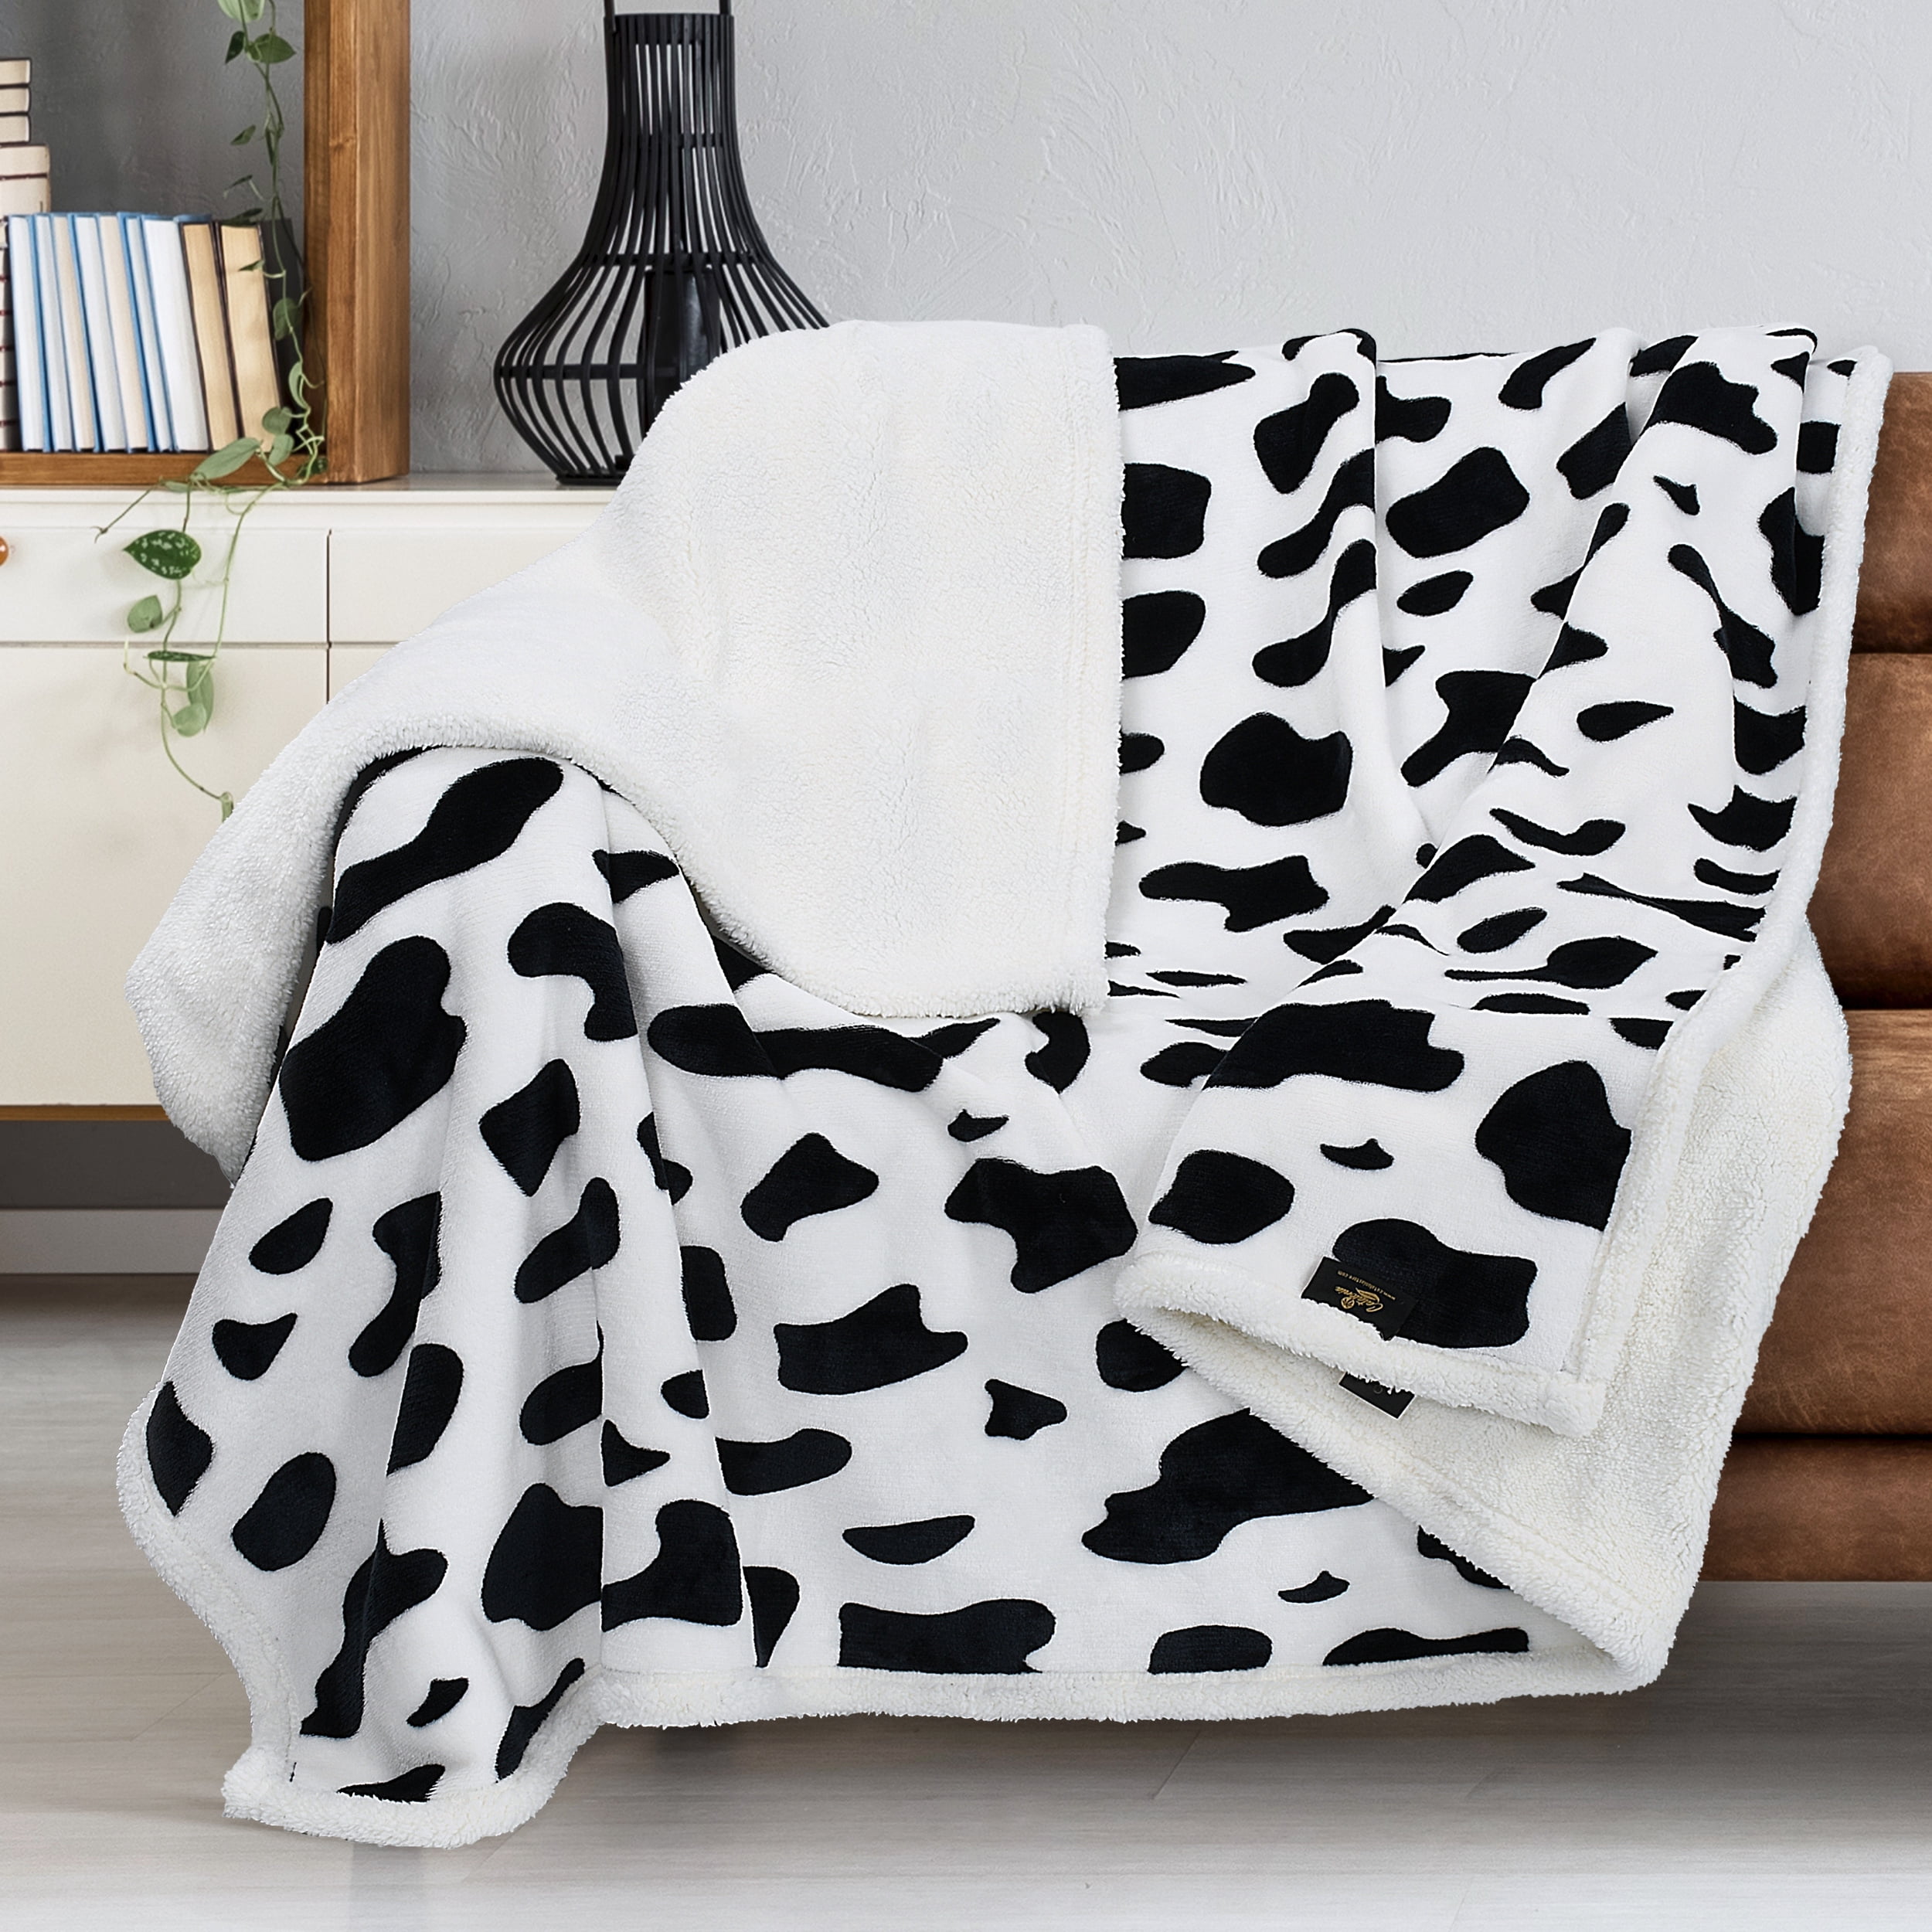 Ultra-Soft Micro Fleece Blanket 3D Fashion Print All Season Couch Sofa Warm Bed Throw Blanket Perfect for Kids Adults Family Birthday Gift 60X50 